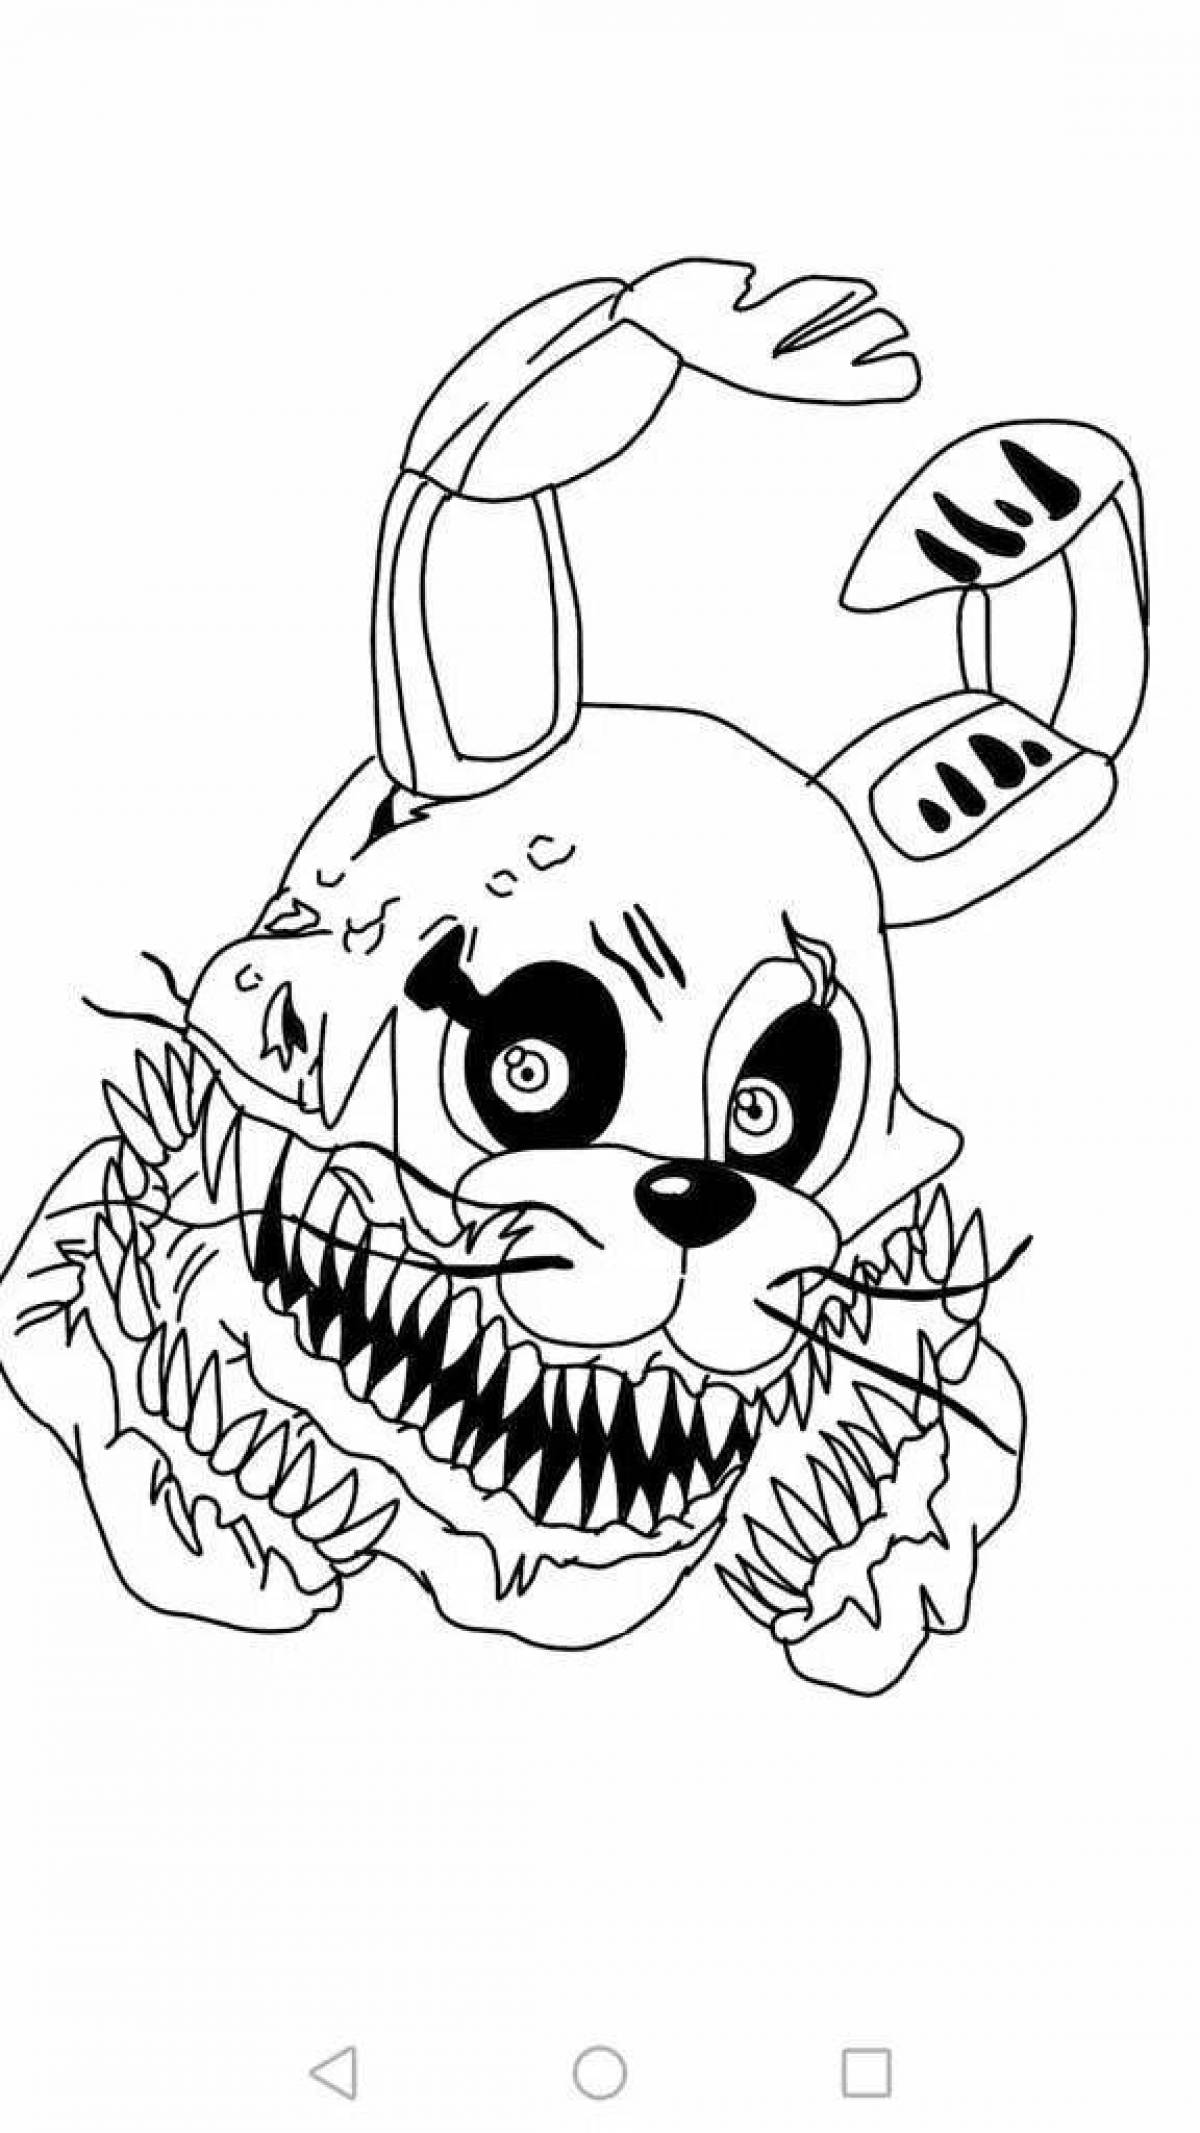 Colorful twisted animatronics coloring page